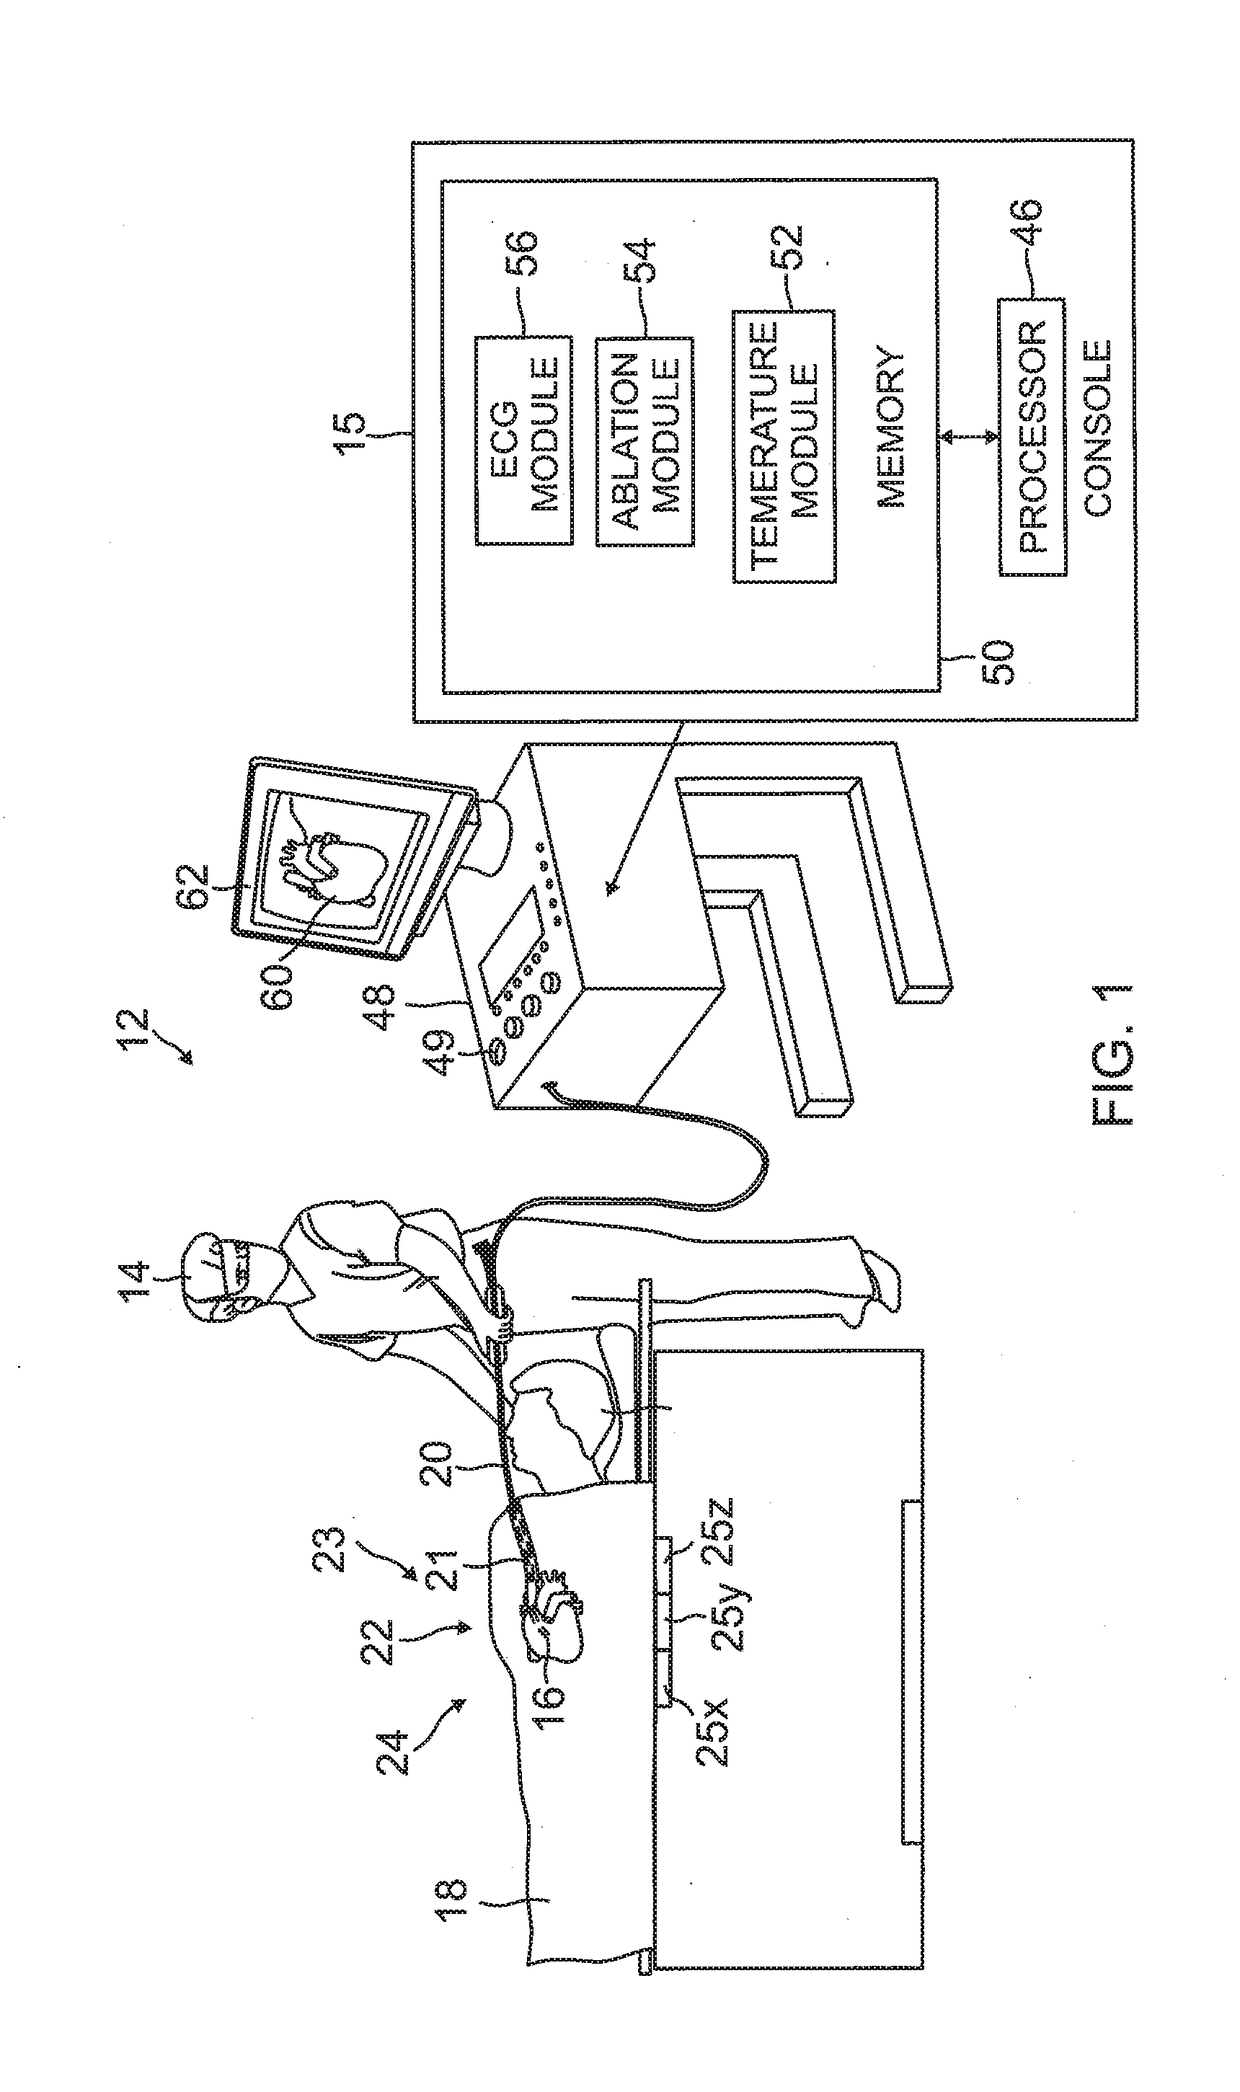 Irrigated balloon catheter with flexible circuit electrode assembly